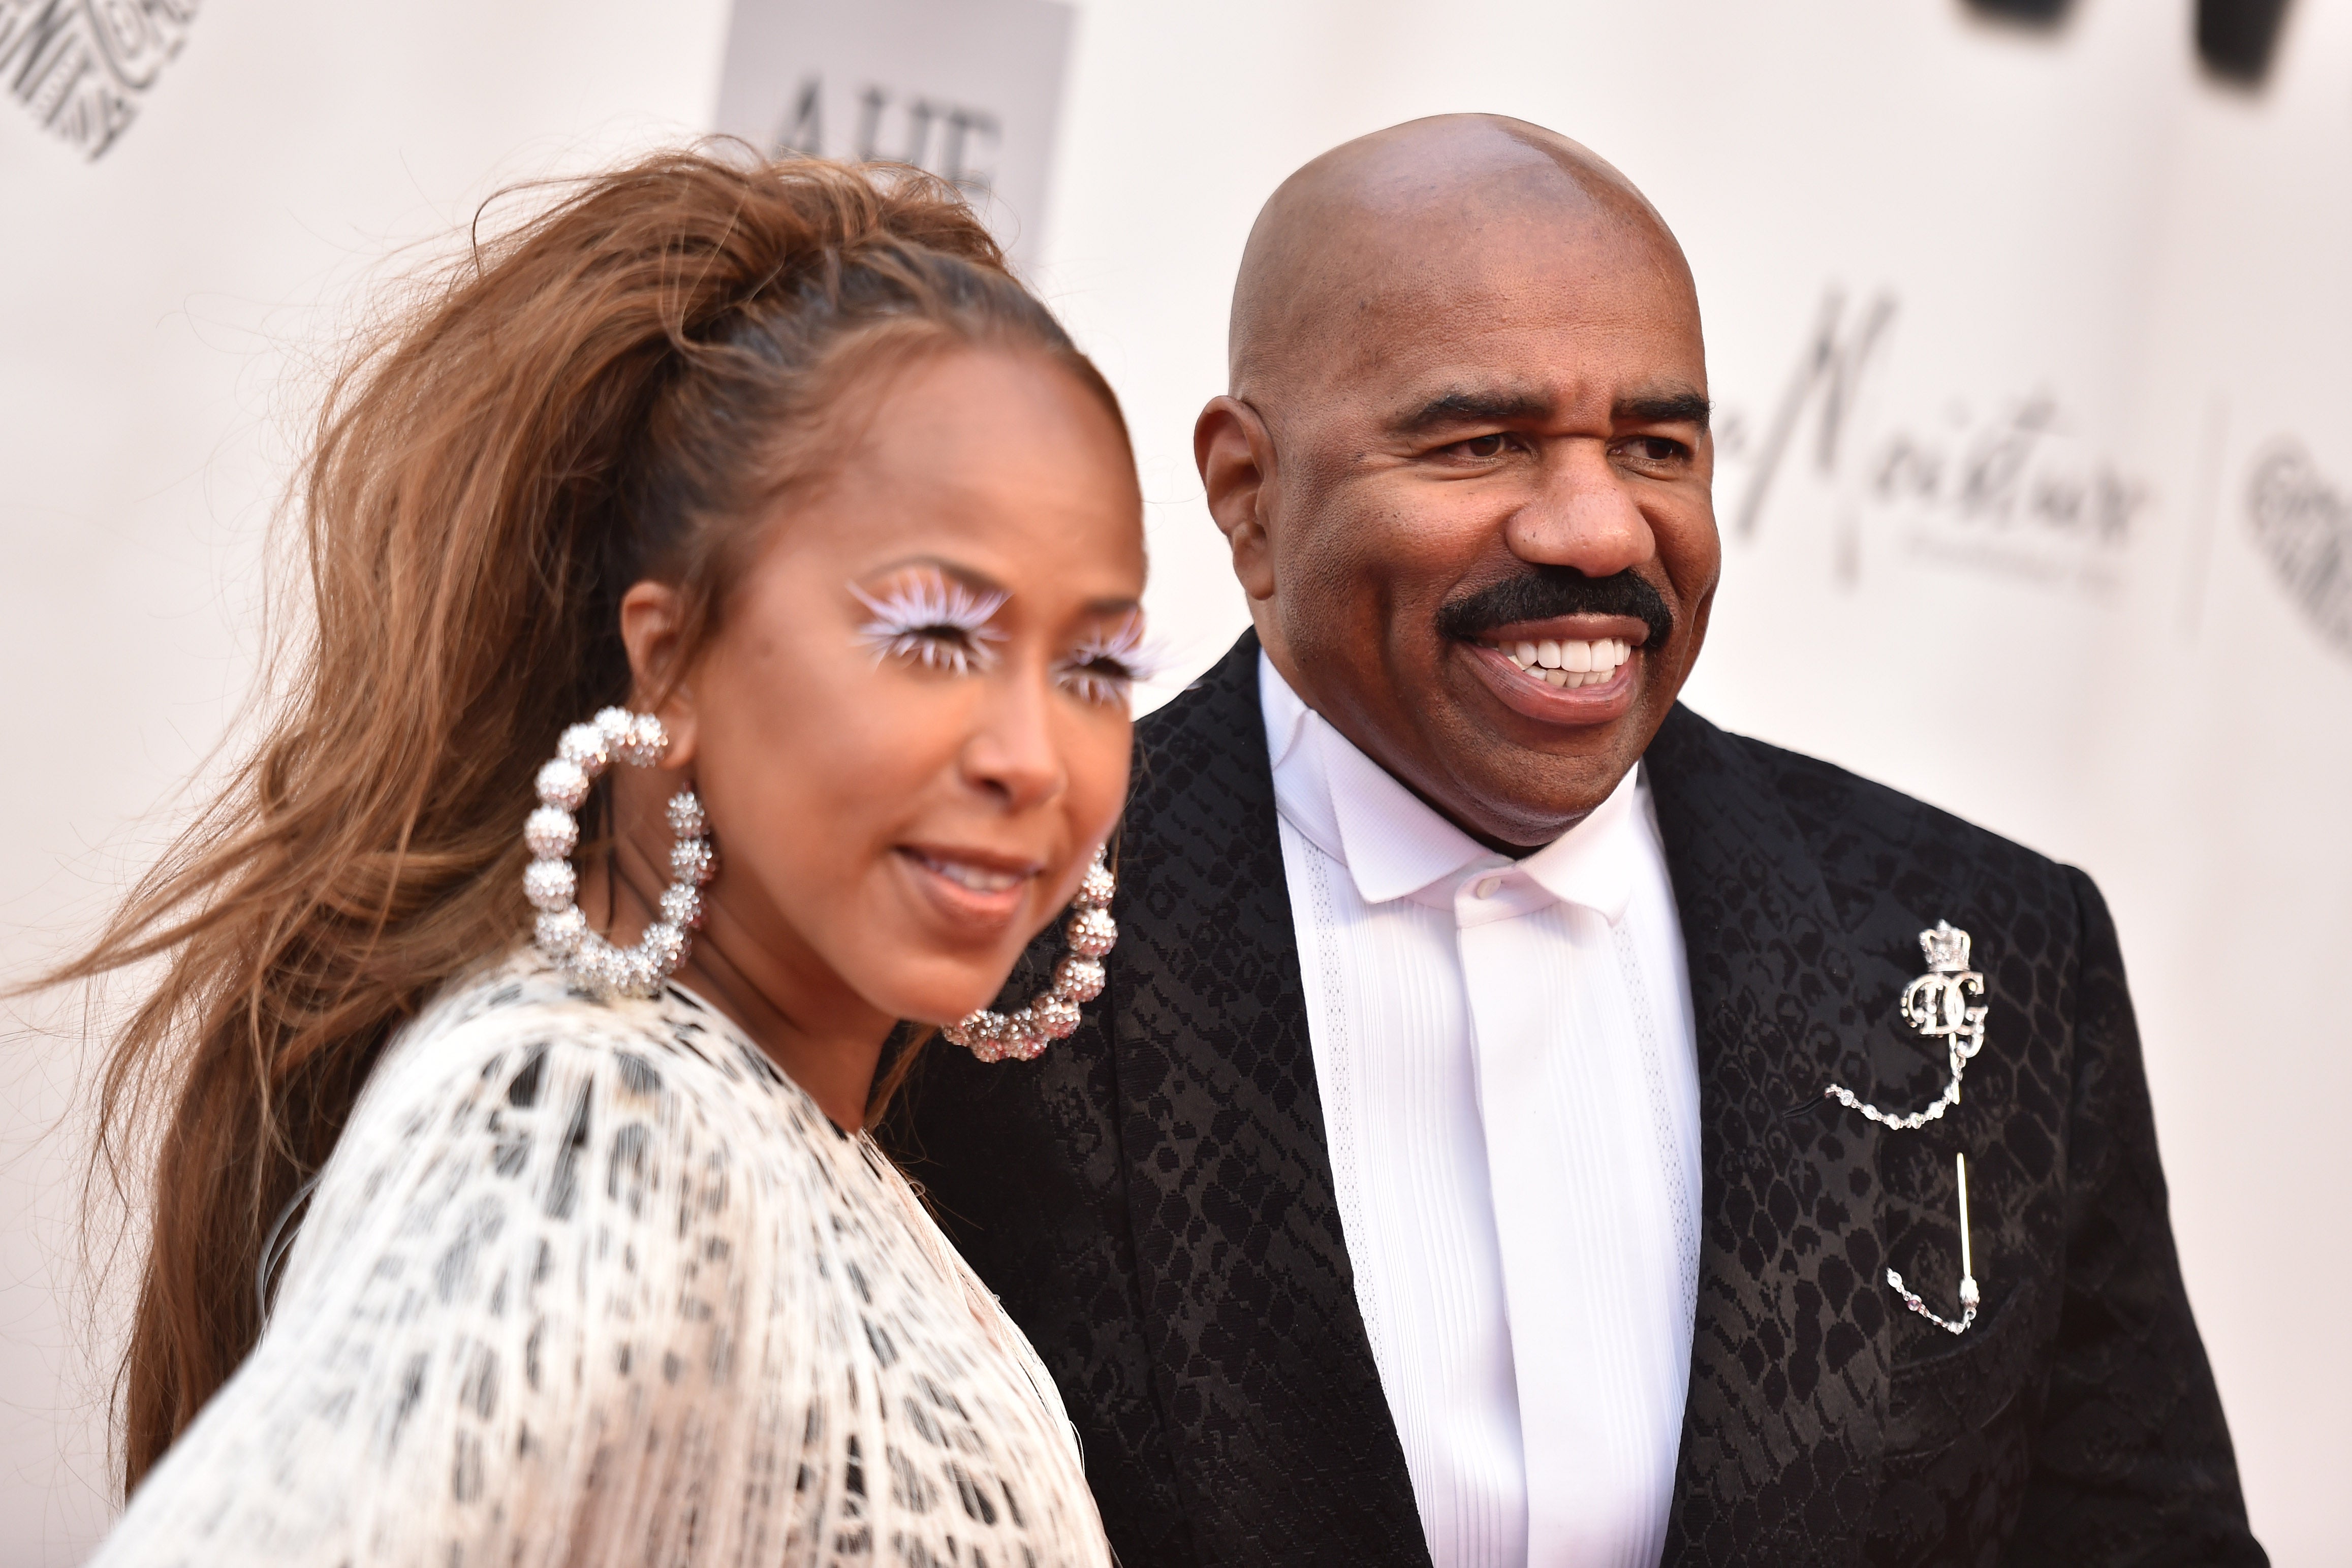 Steve Harvey and Wife Marjorie 'Still Going Strong' as They Celebrate 16th  Wedding Anniversary